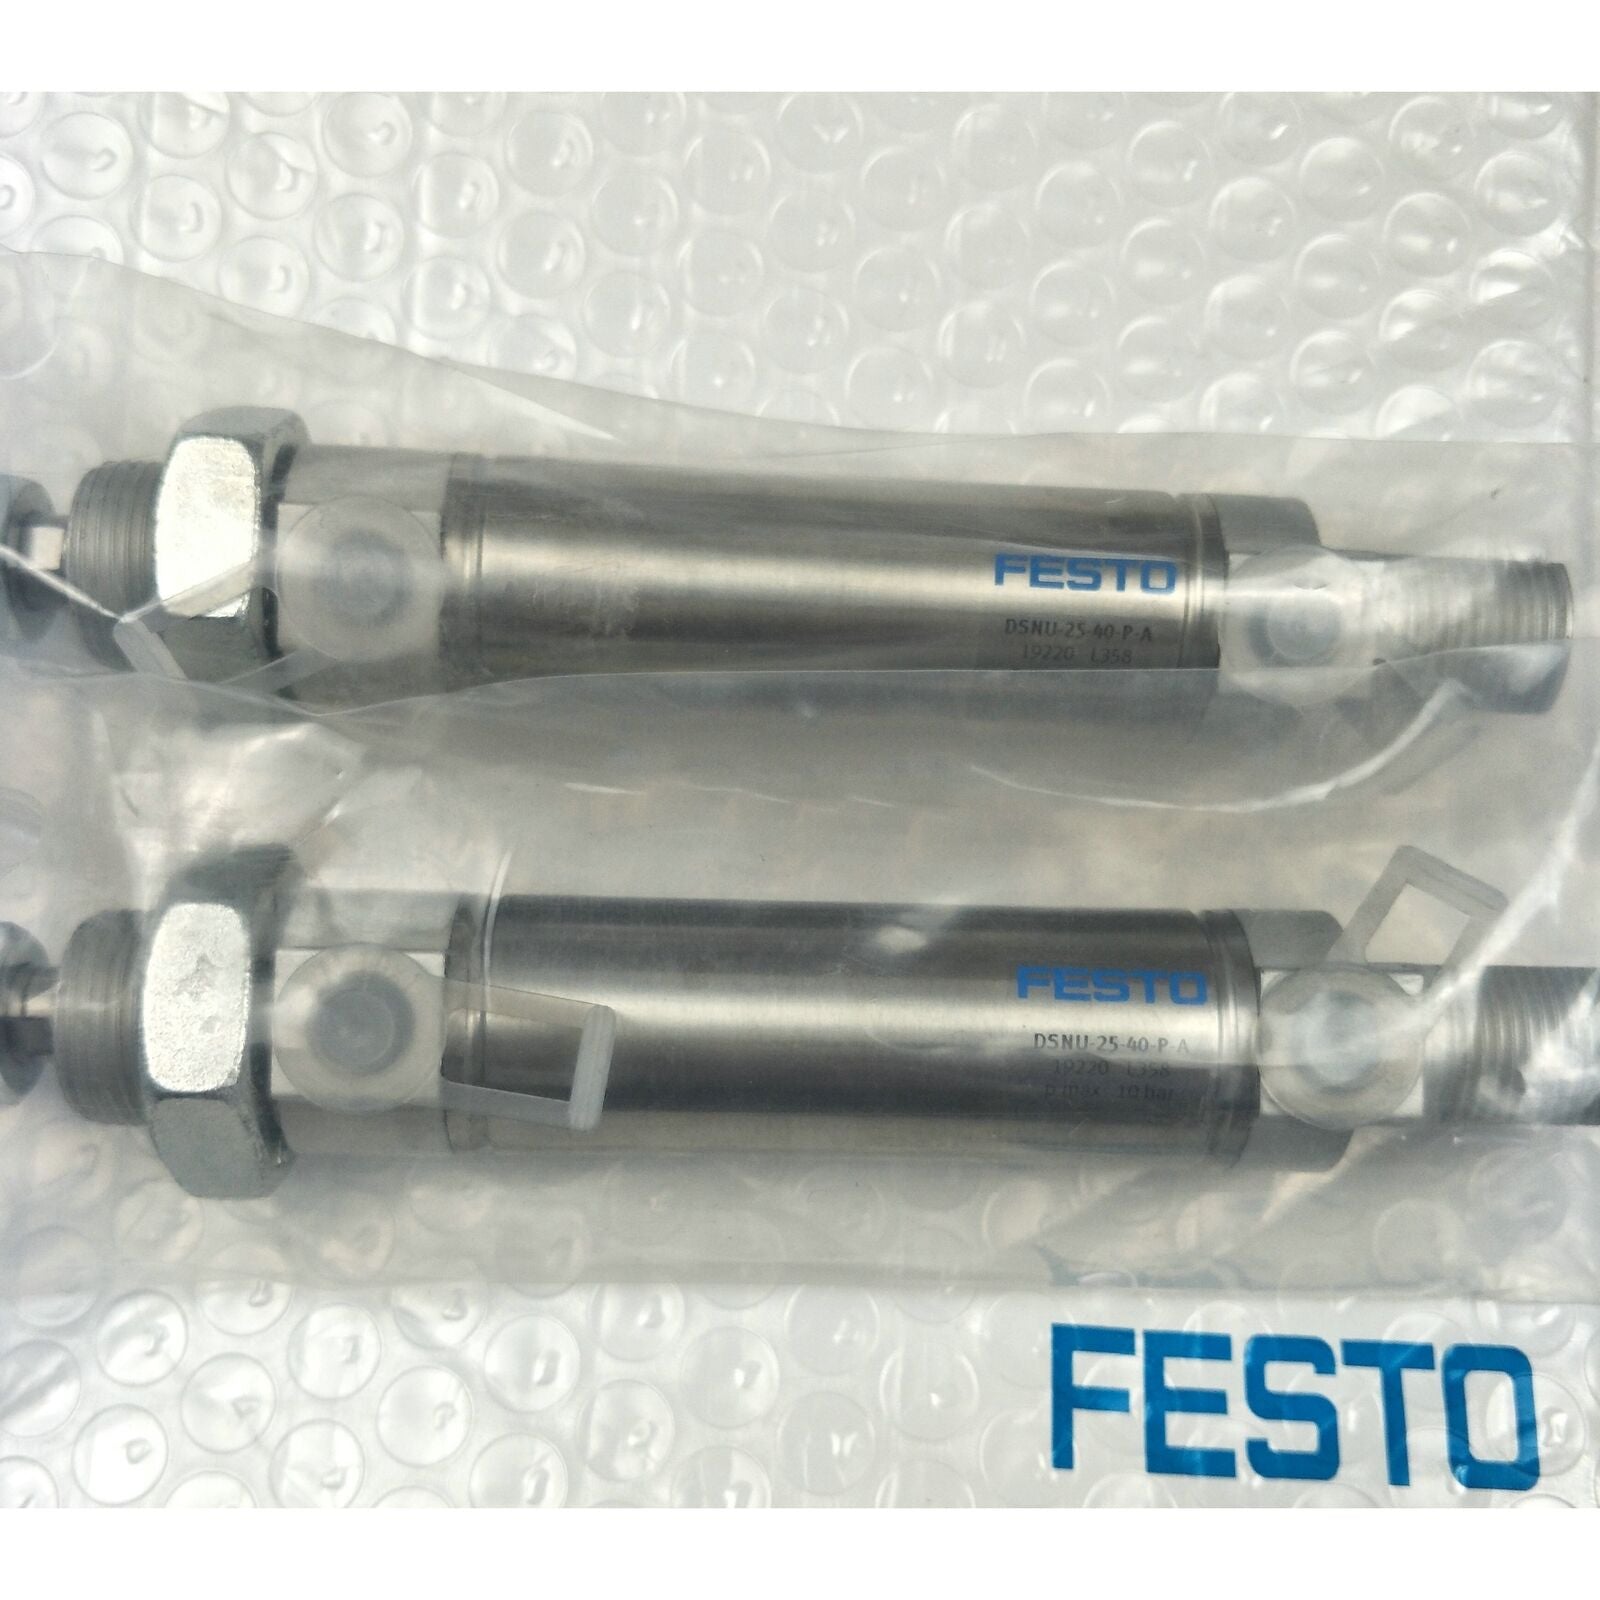 new one  for FESTO Mini cylinder DSNU-25-40-P-A 19220 spot stock